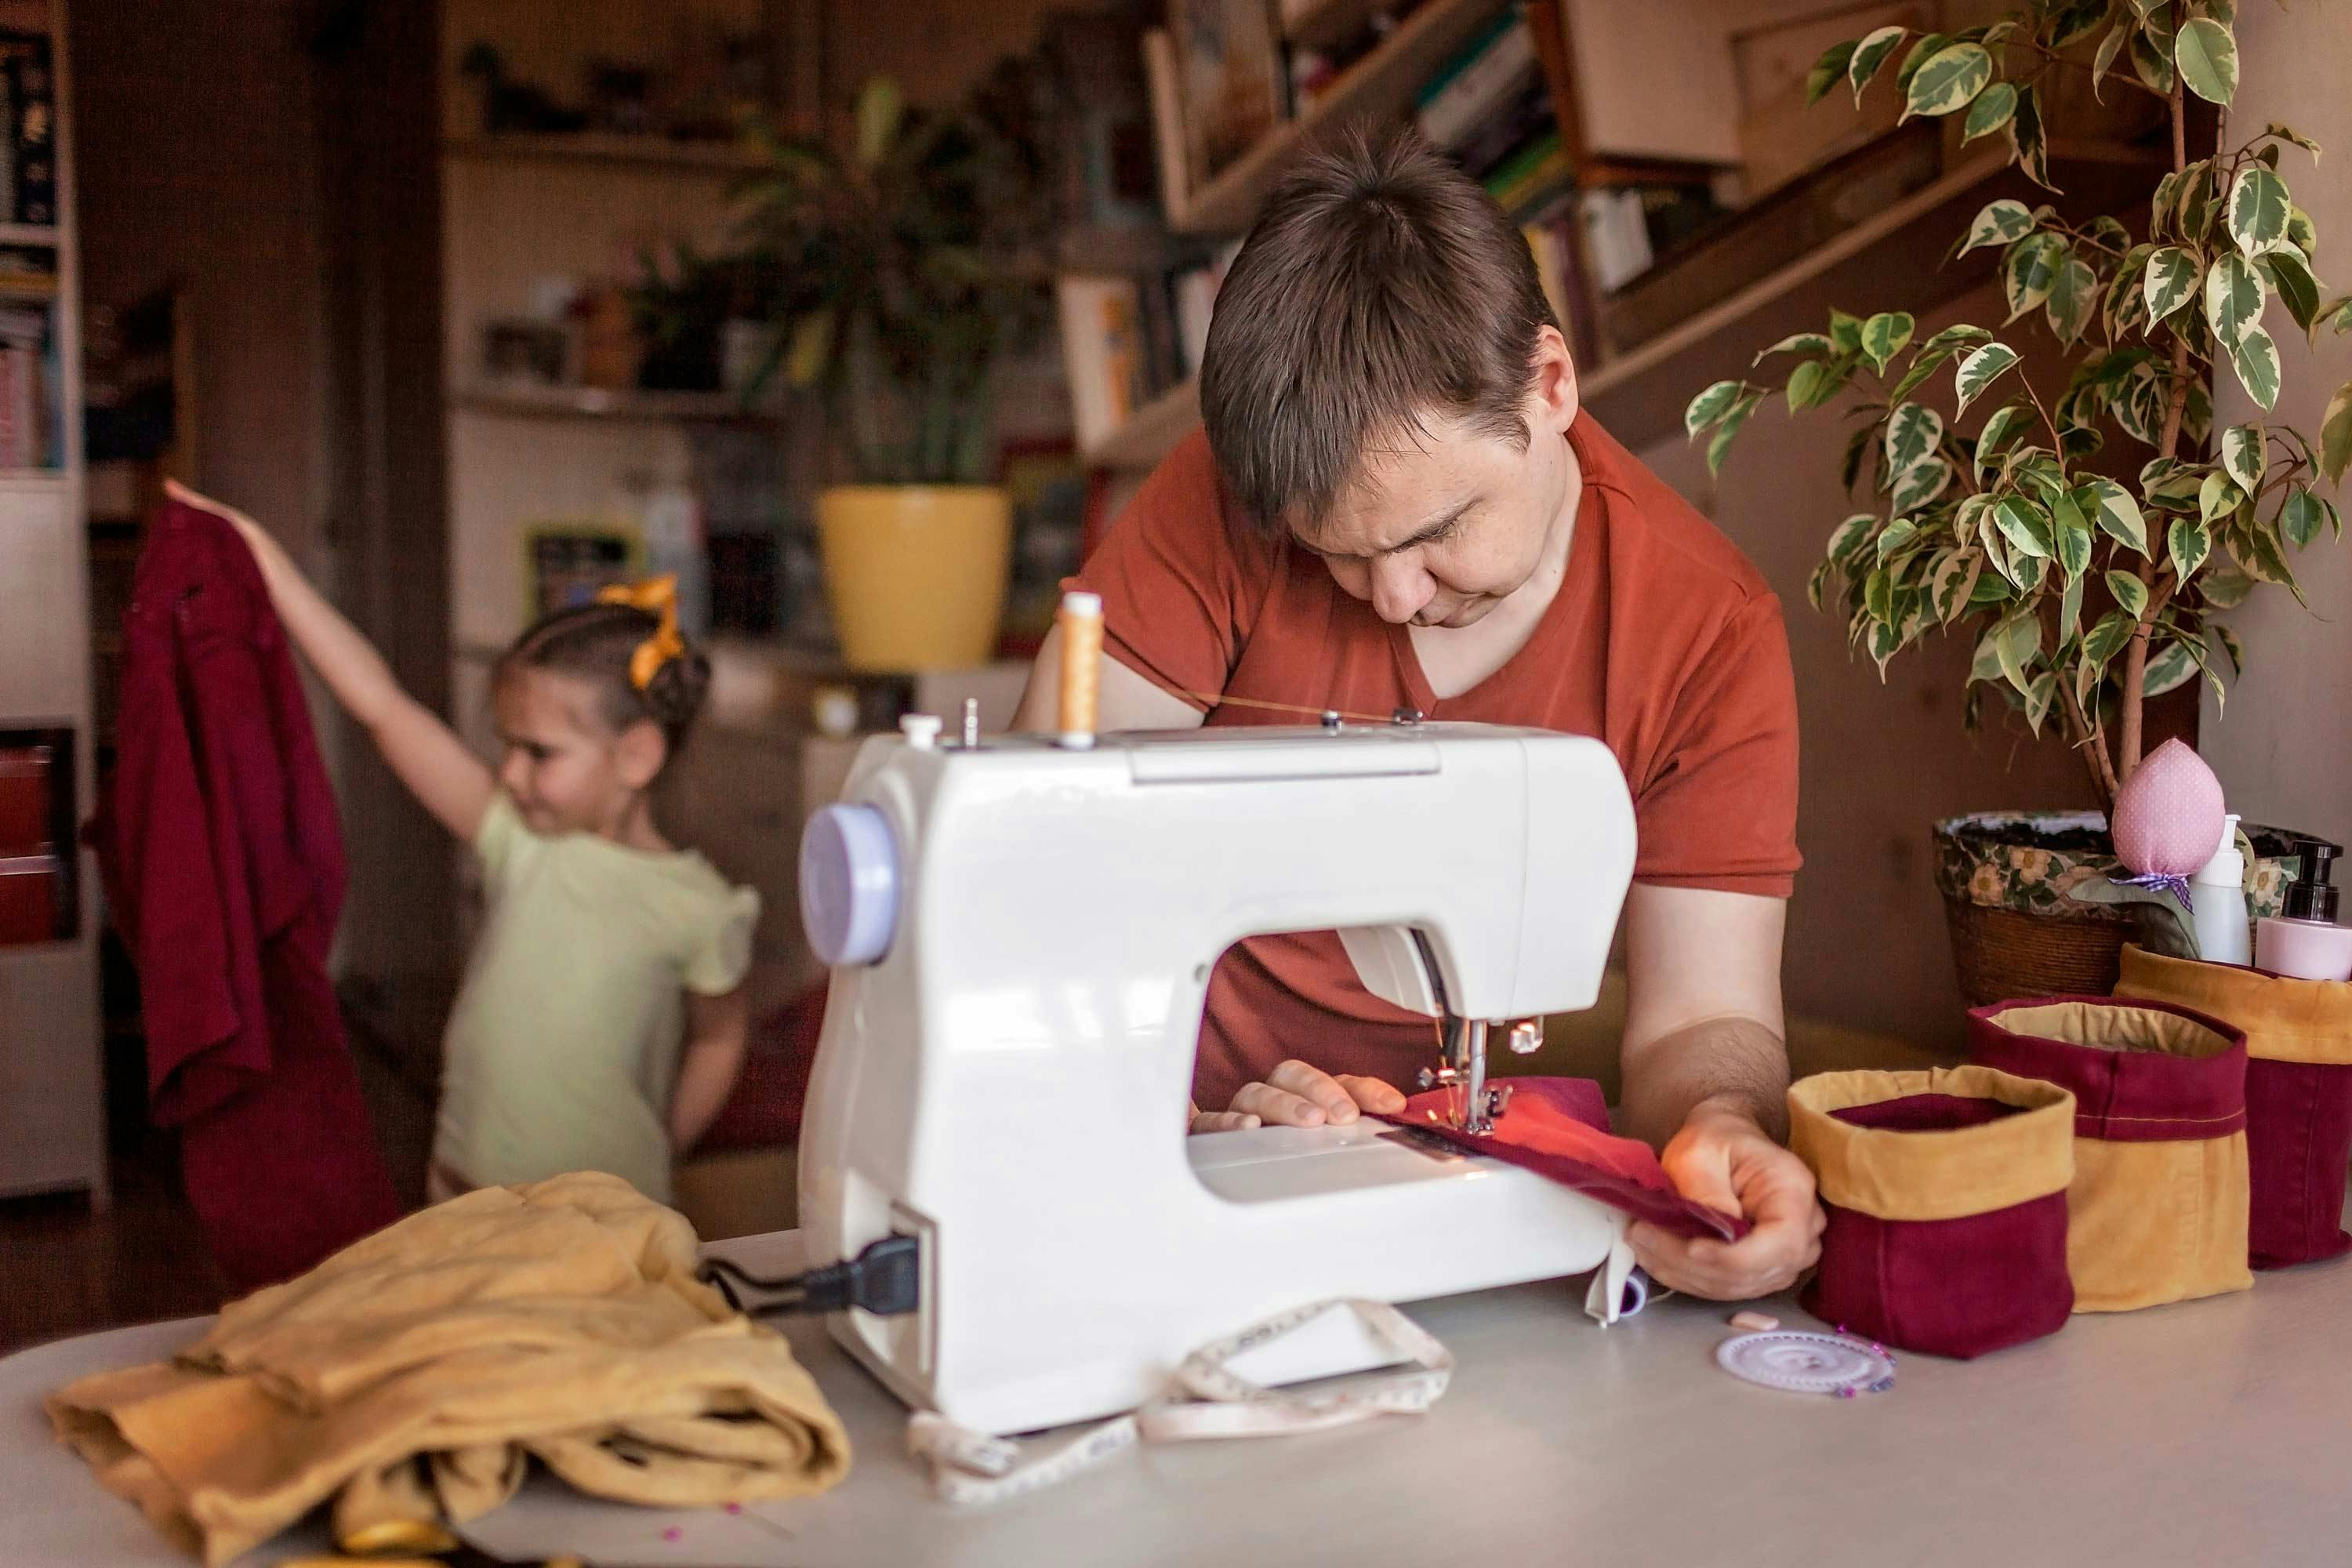  Man sewing in home studio with young child